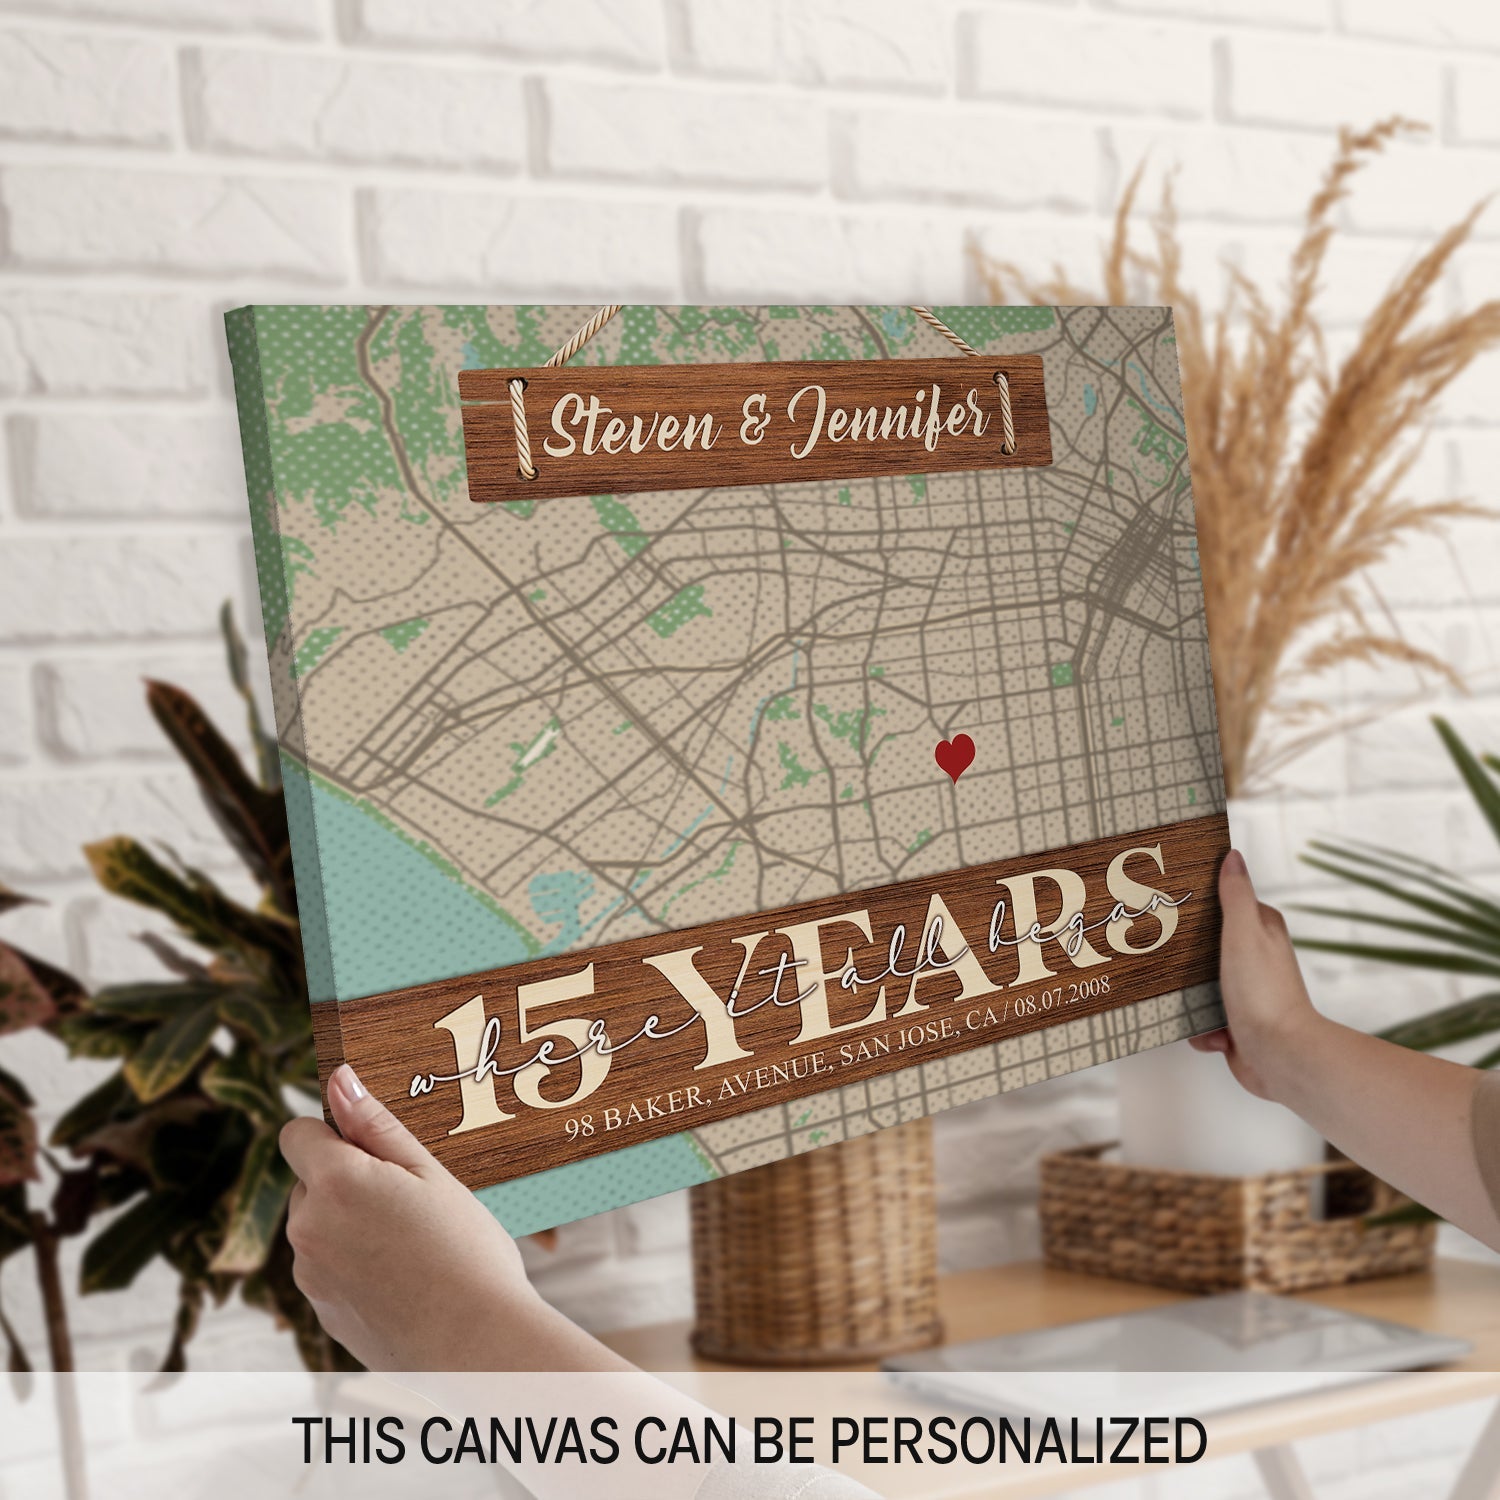 Where It All Began 15th Year - Personalized 15 Year Anniversary gift for him for her - Custom Canvas - MyMindfulGifts